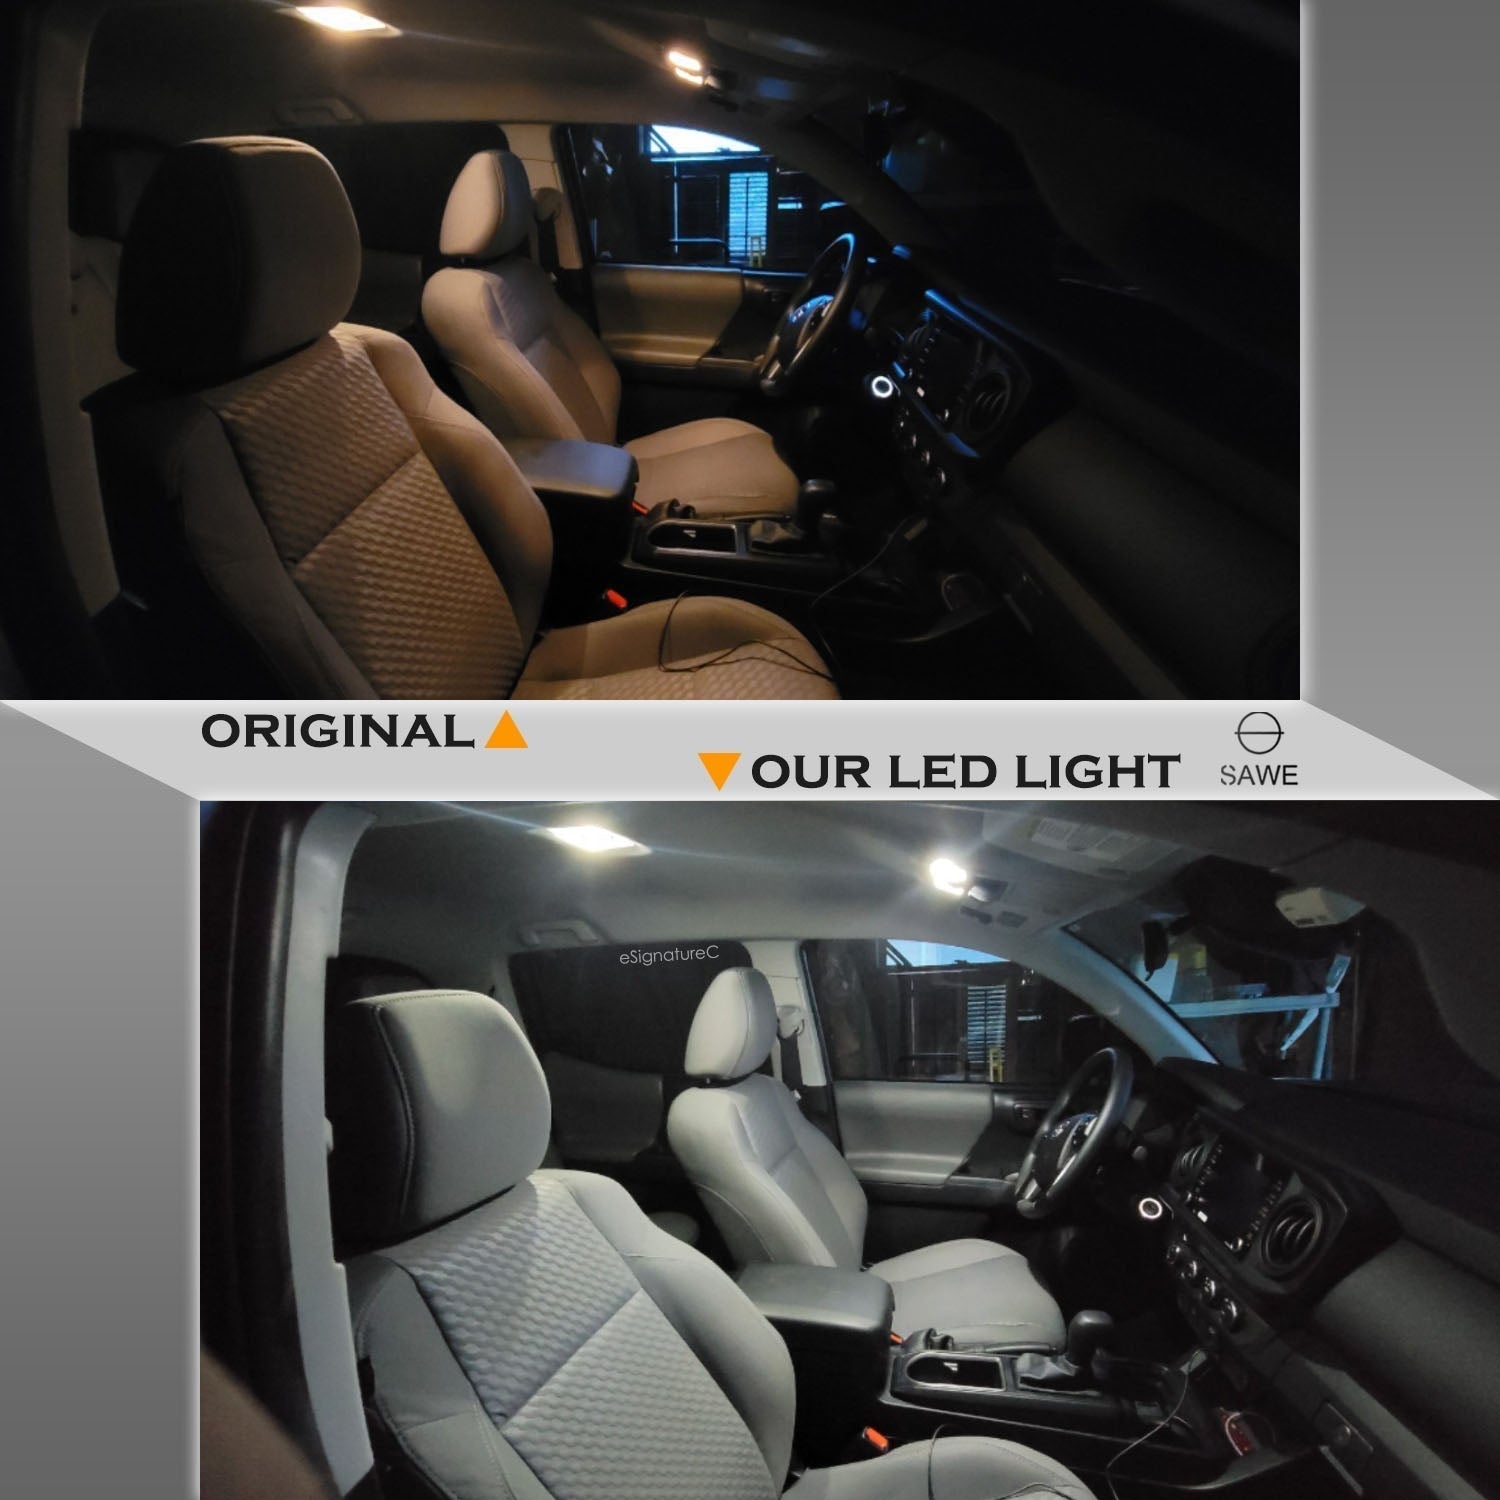 For Toyota Tundra Interior LED Lights - Dome & Map Lights Package Kit for 2000 - 2006 - White